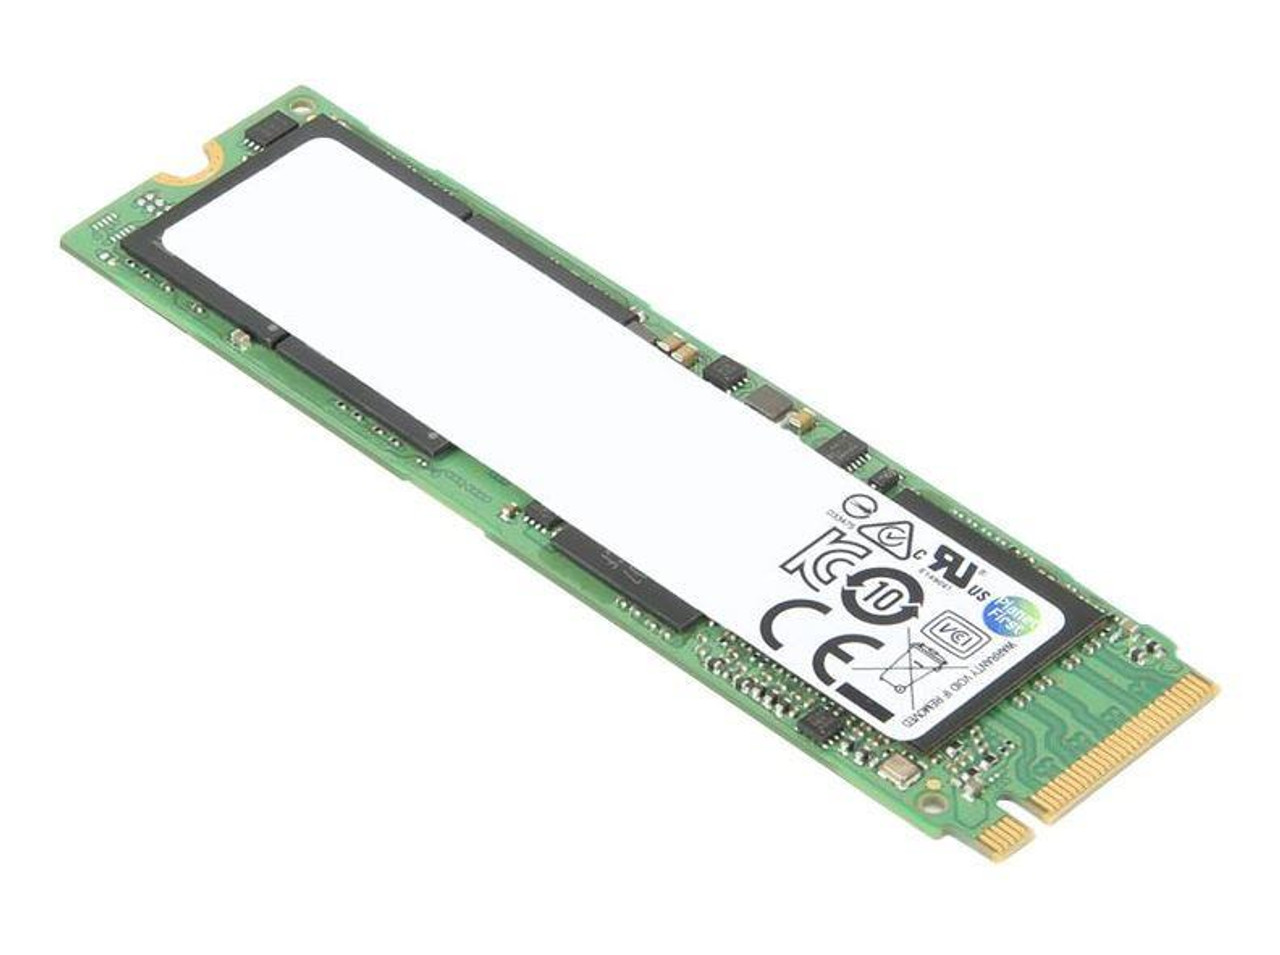 4XB0W79581 Lenovo 512GB PCI Express NVMe (TCG Opal) M.2 2280 Internal Solid State Drive (SSD) for ThinkCentre M75